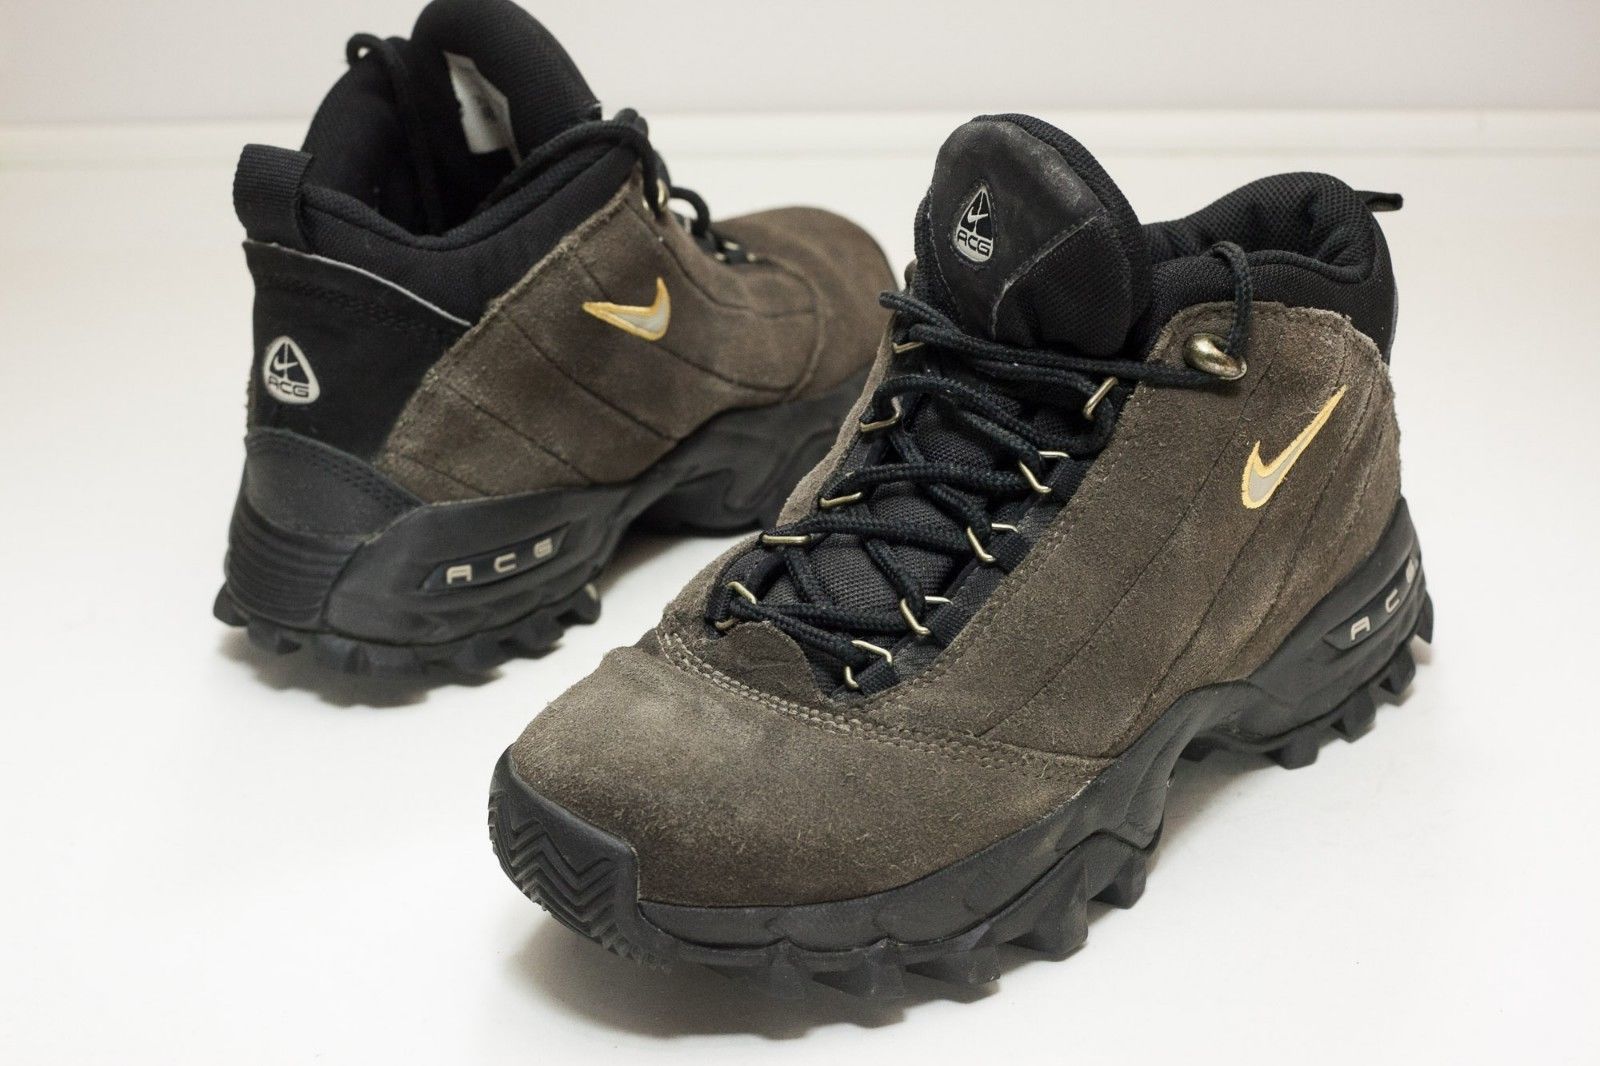 Nike ACG 9 Brown Women's Hiking Boots and 50 similar items